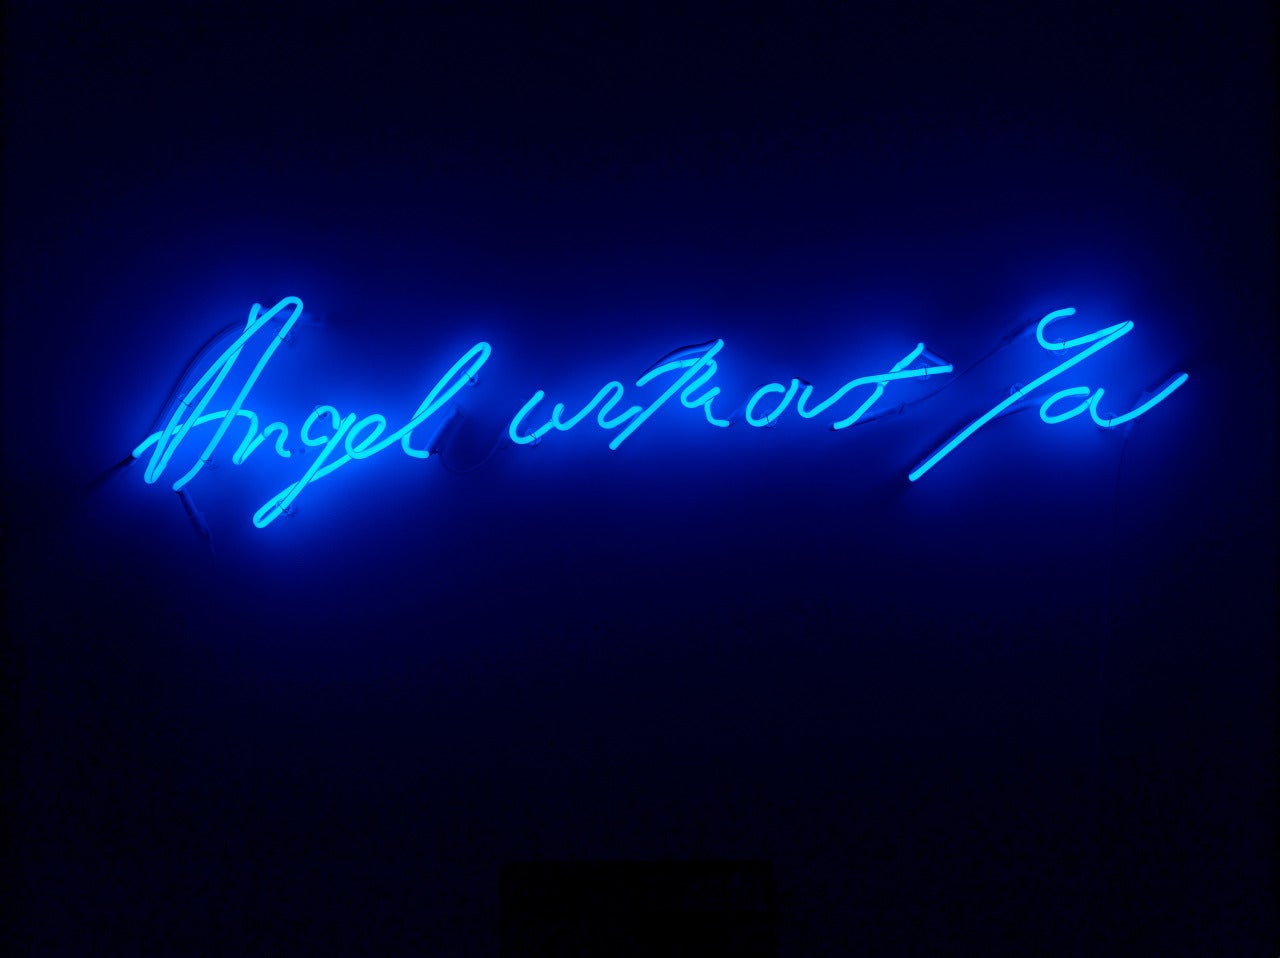 Angel without you - Sculpture by Tracey Emin